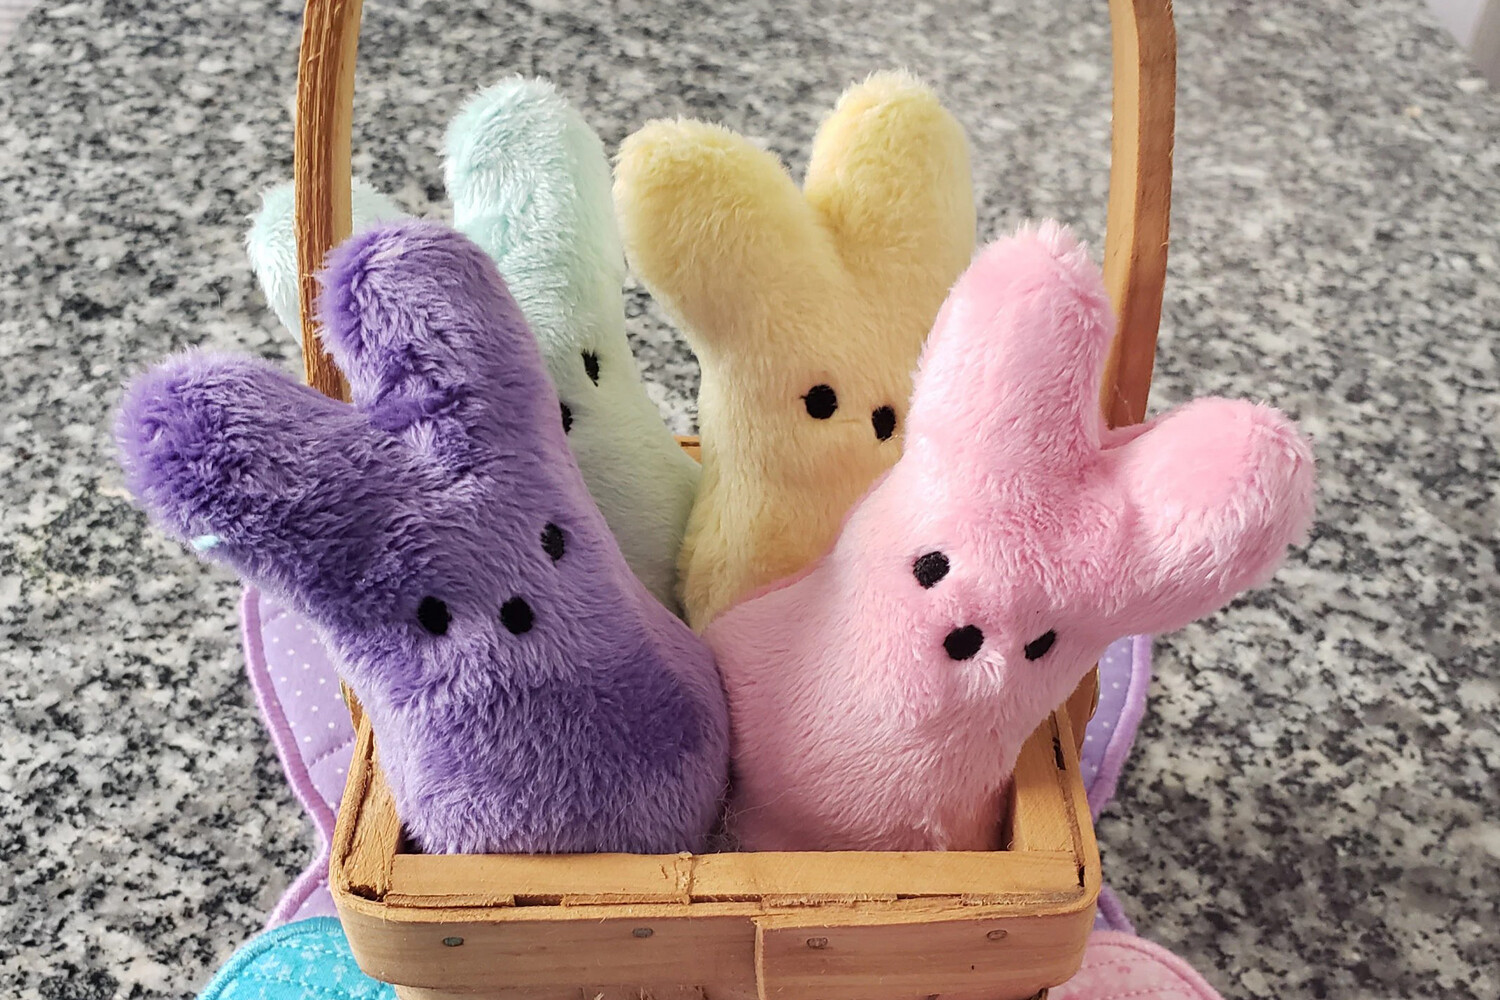 Peeps inspired Bunny plush stuffie in the hoop embroidery design